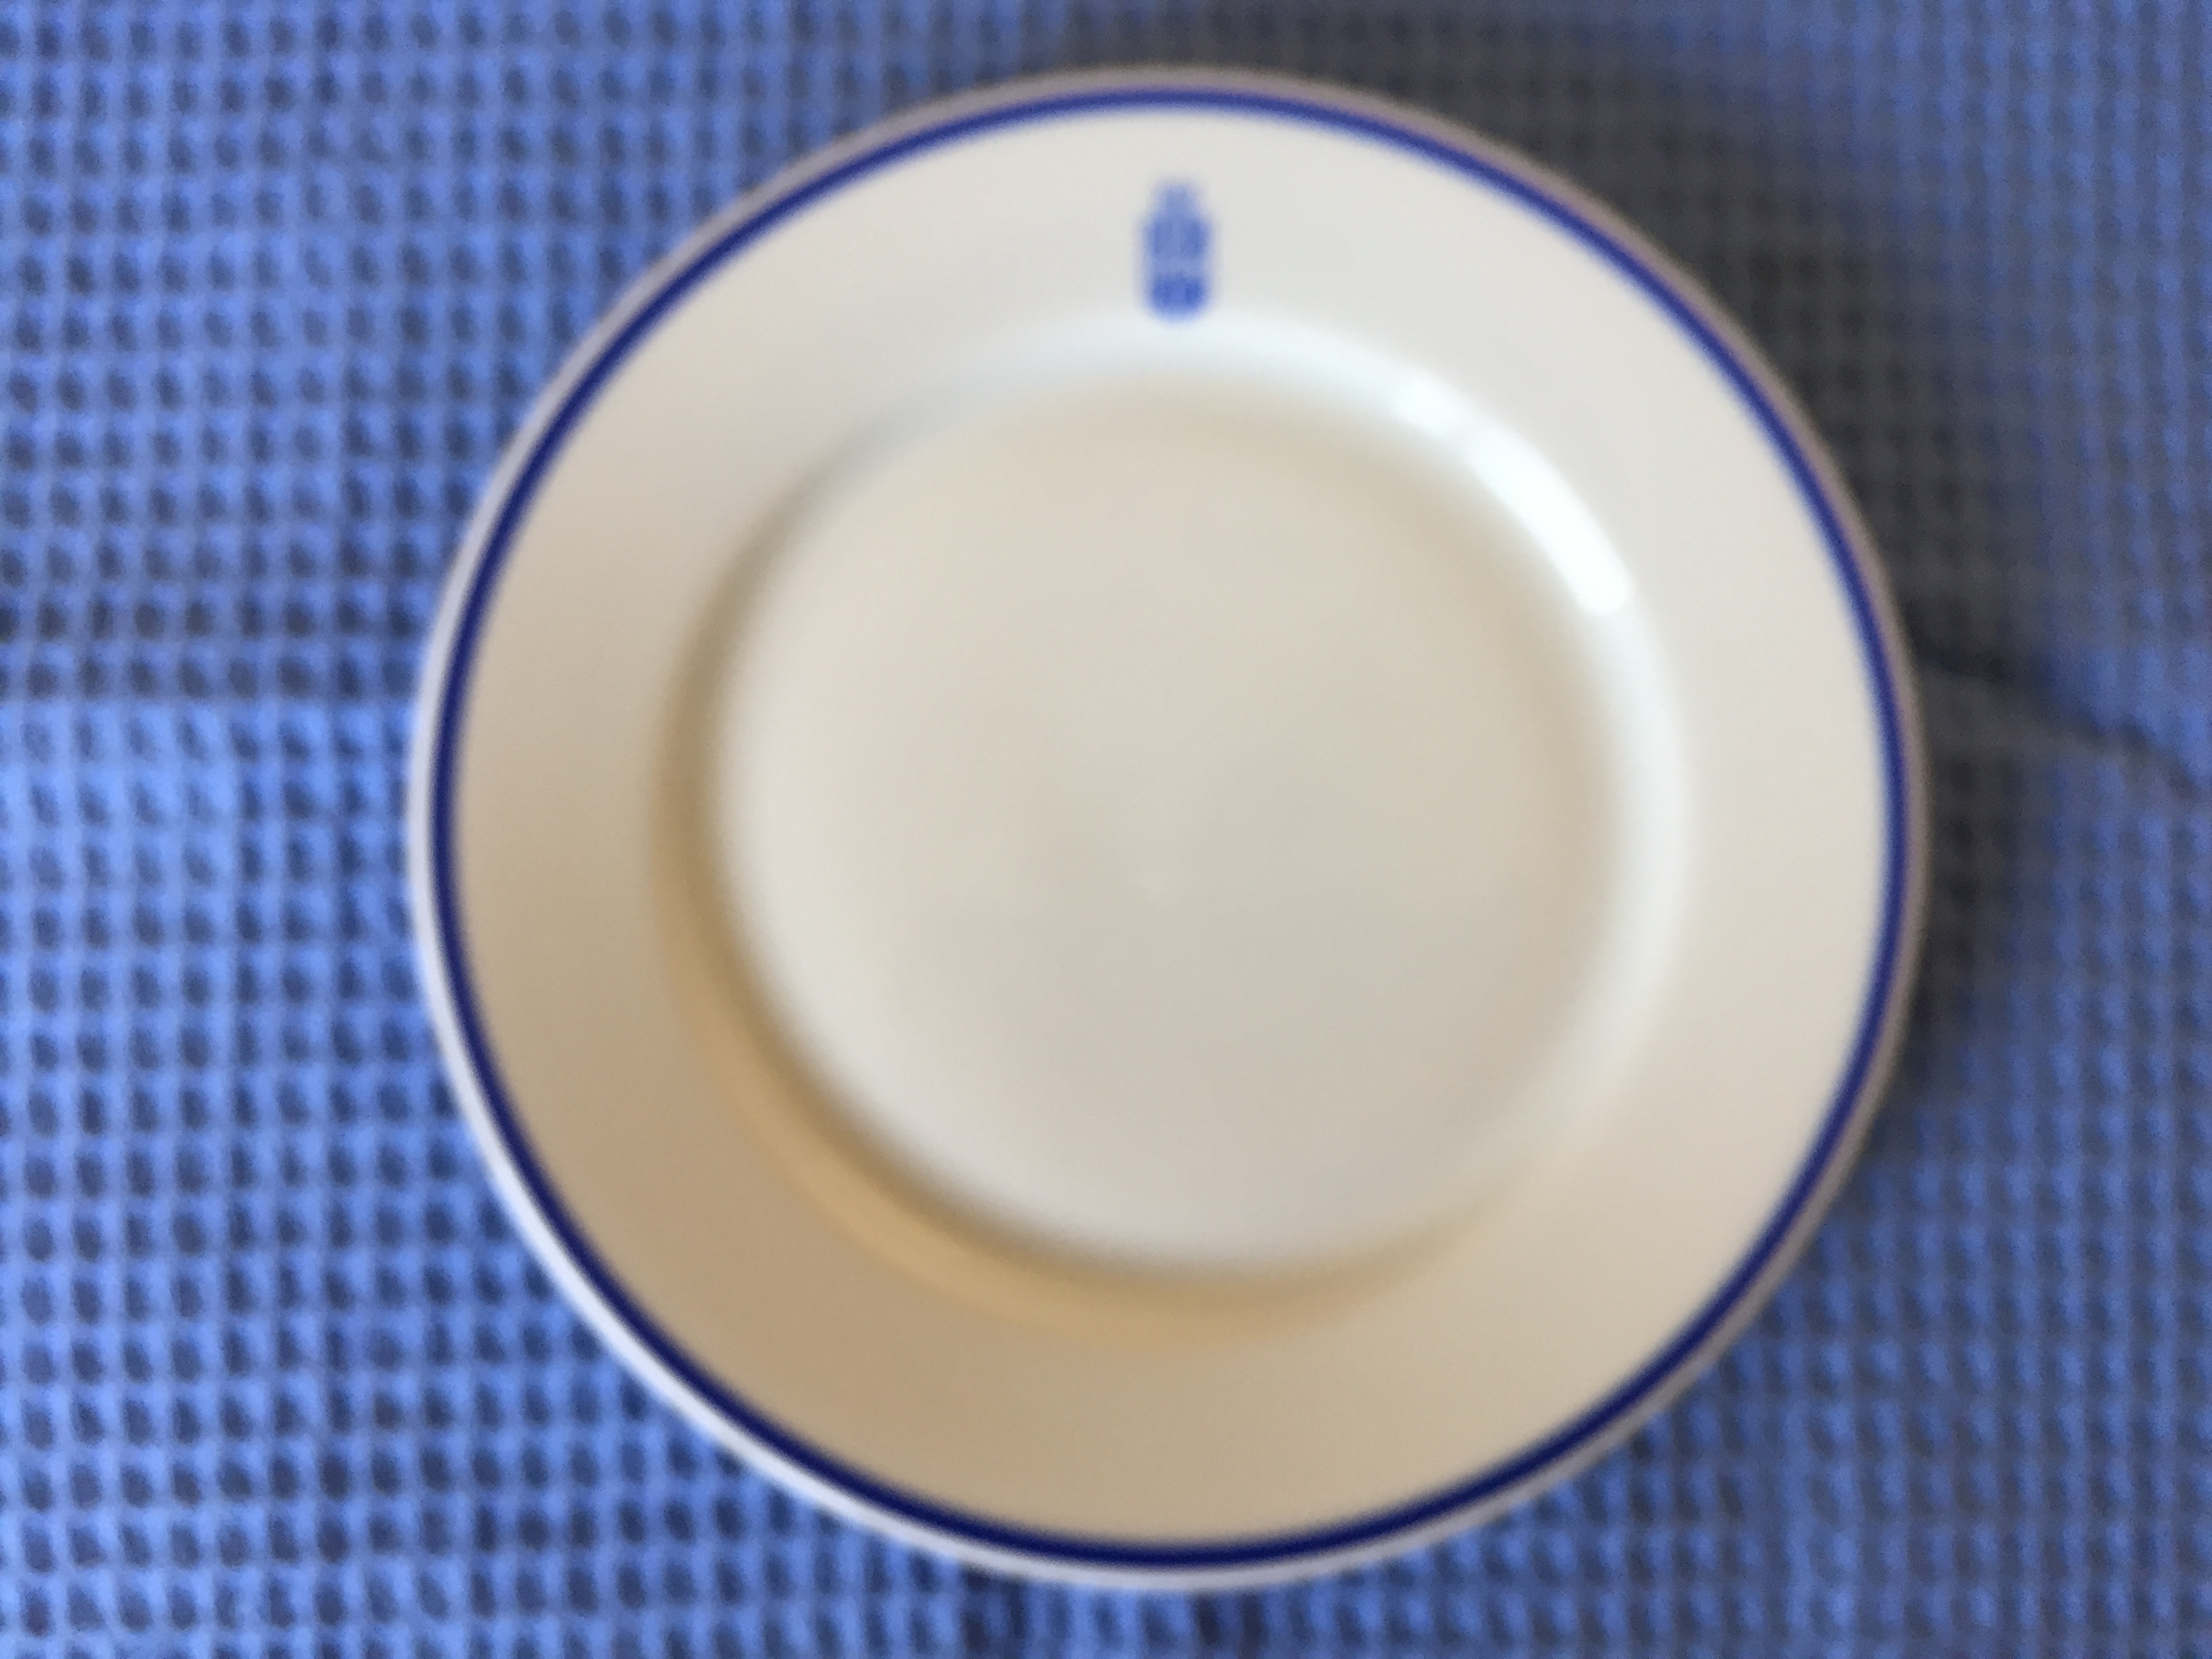 RARE TO FIND CHINA PLATE FROM THE POLISH OCEAN LINE SHIPPING COMPANY  